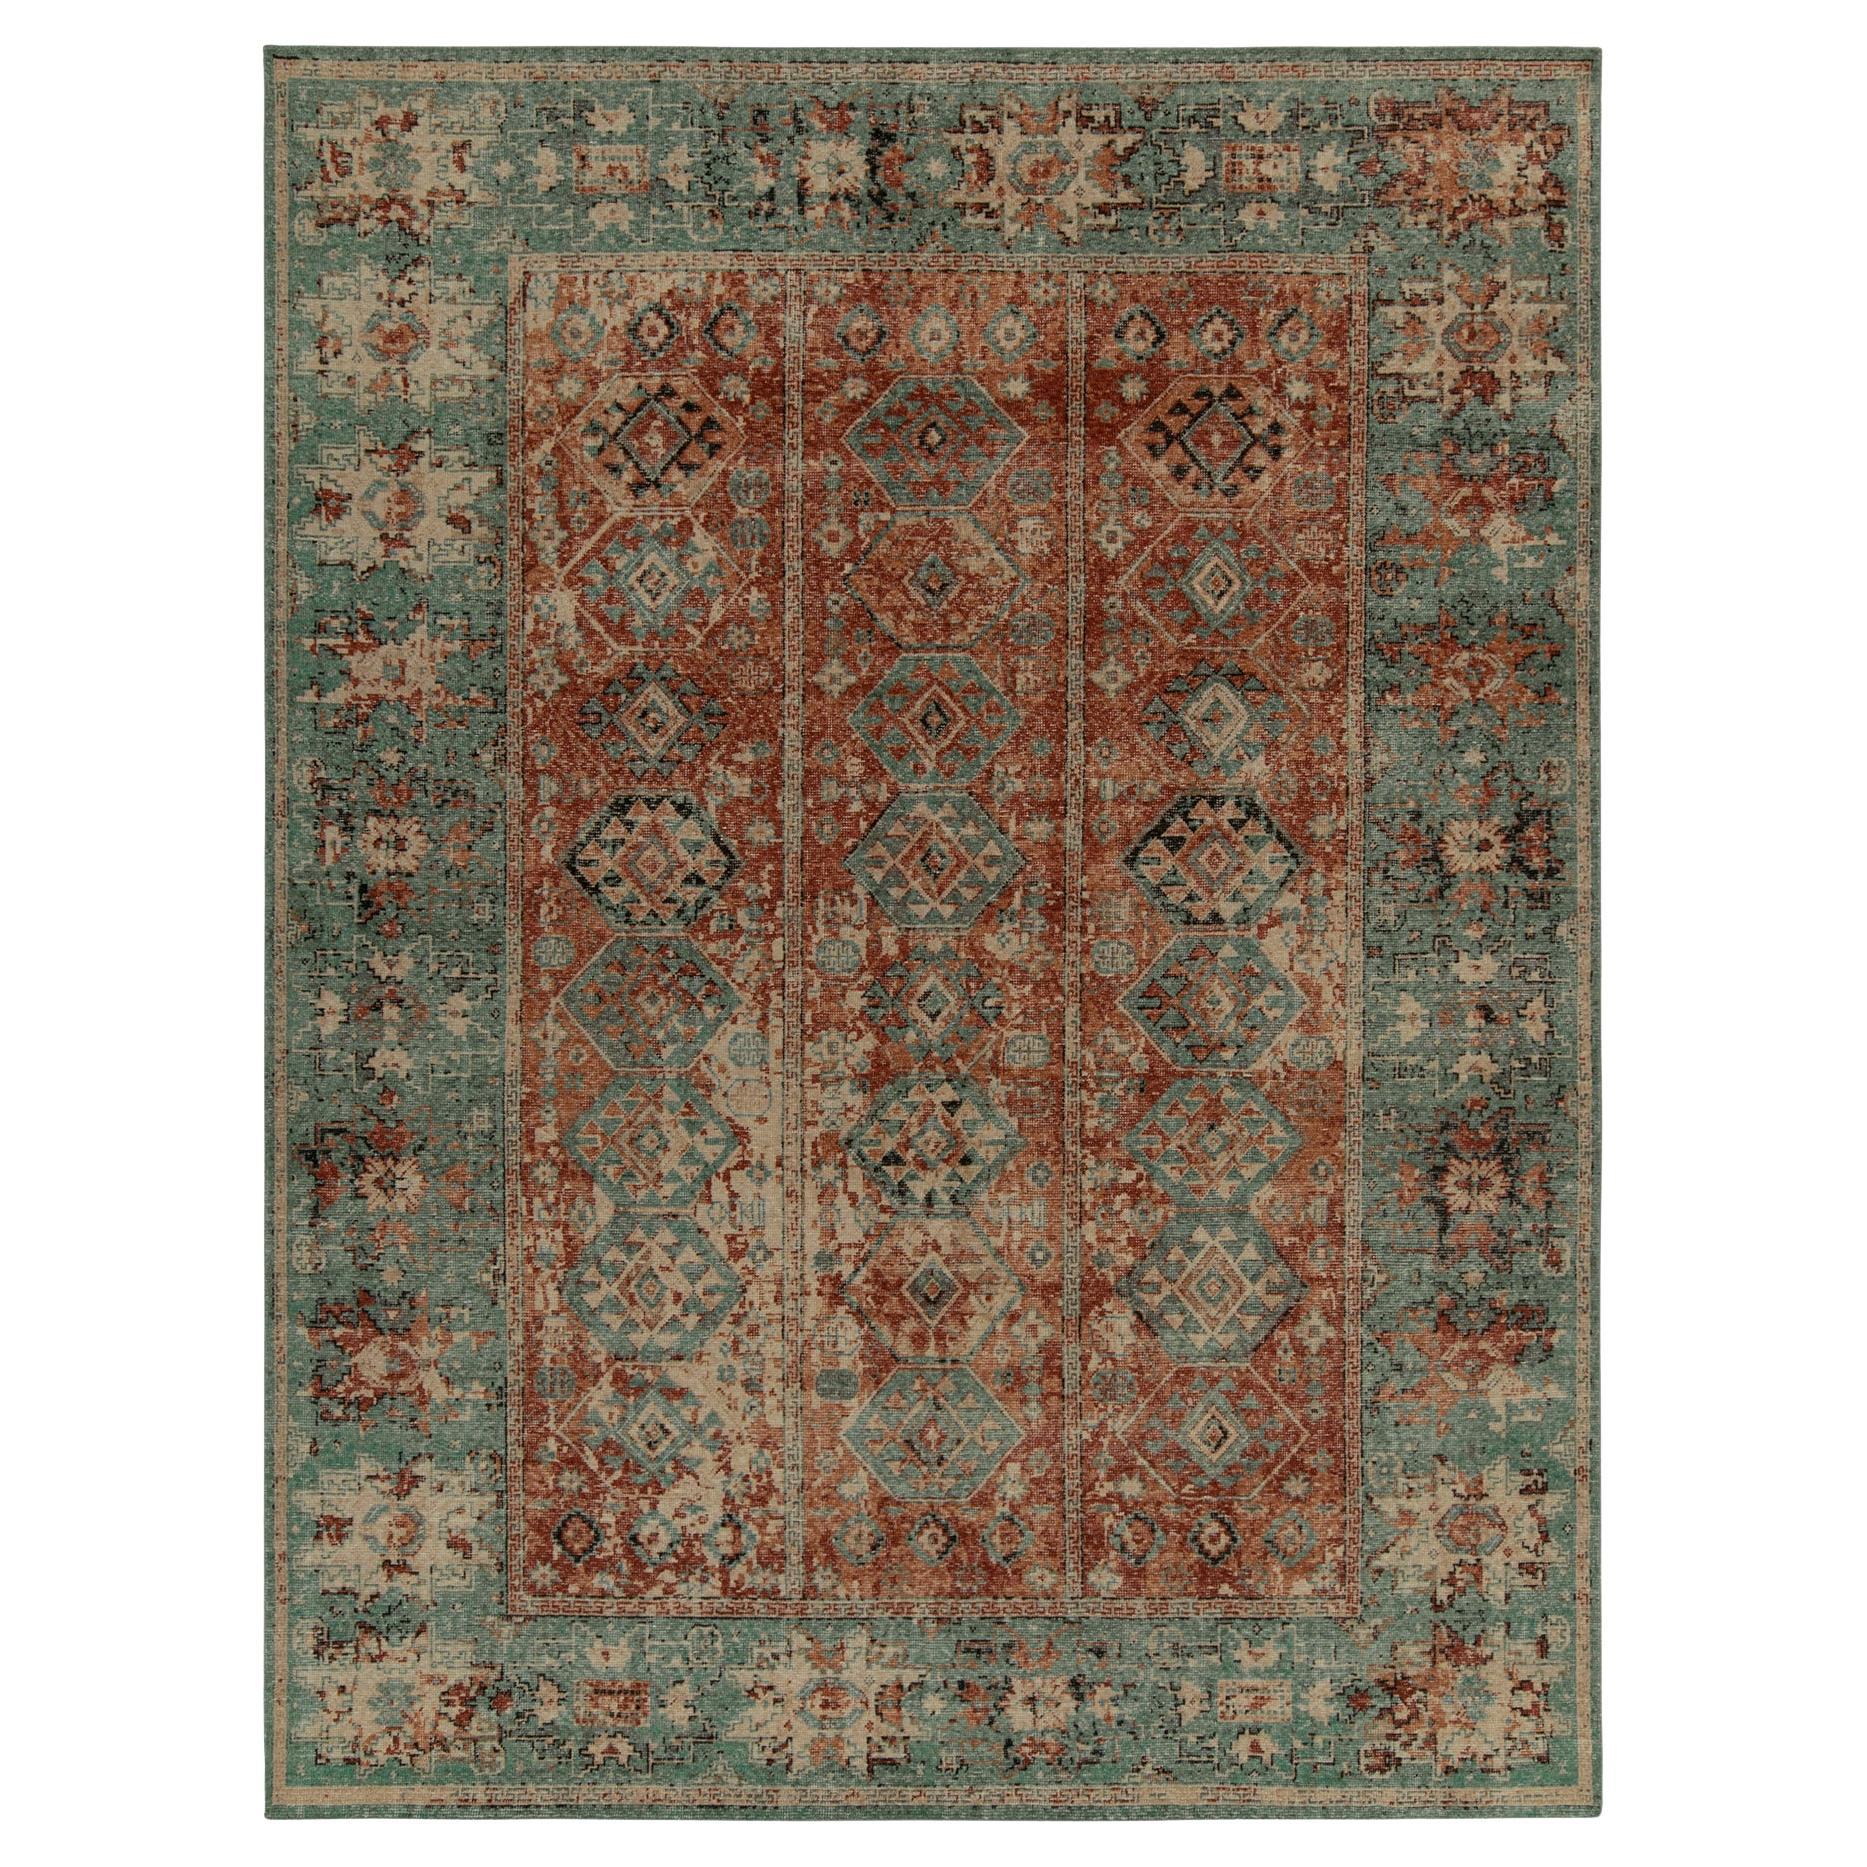 Rug & Kilim’s Distressed Style Rug in Rust, Beige and Teal Tribal Medallions For Sale